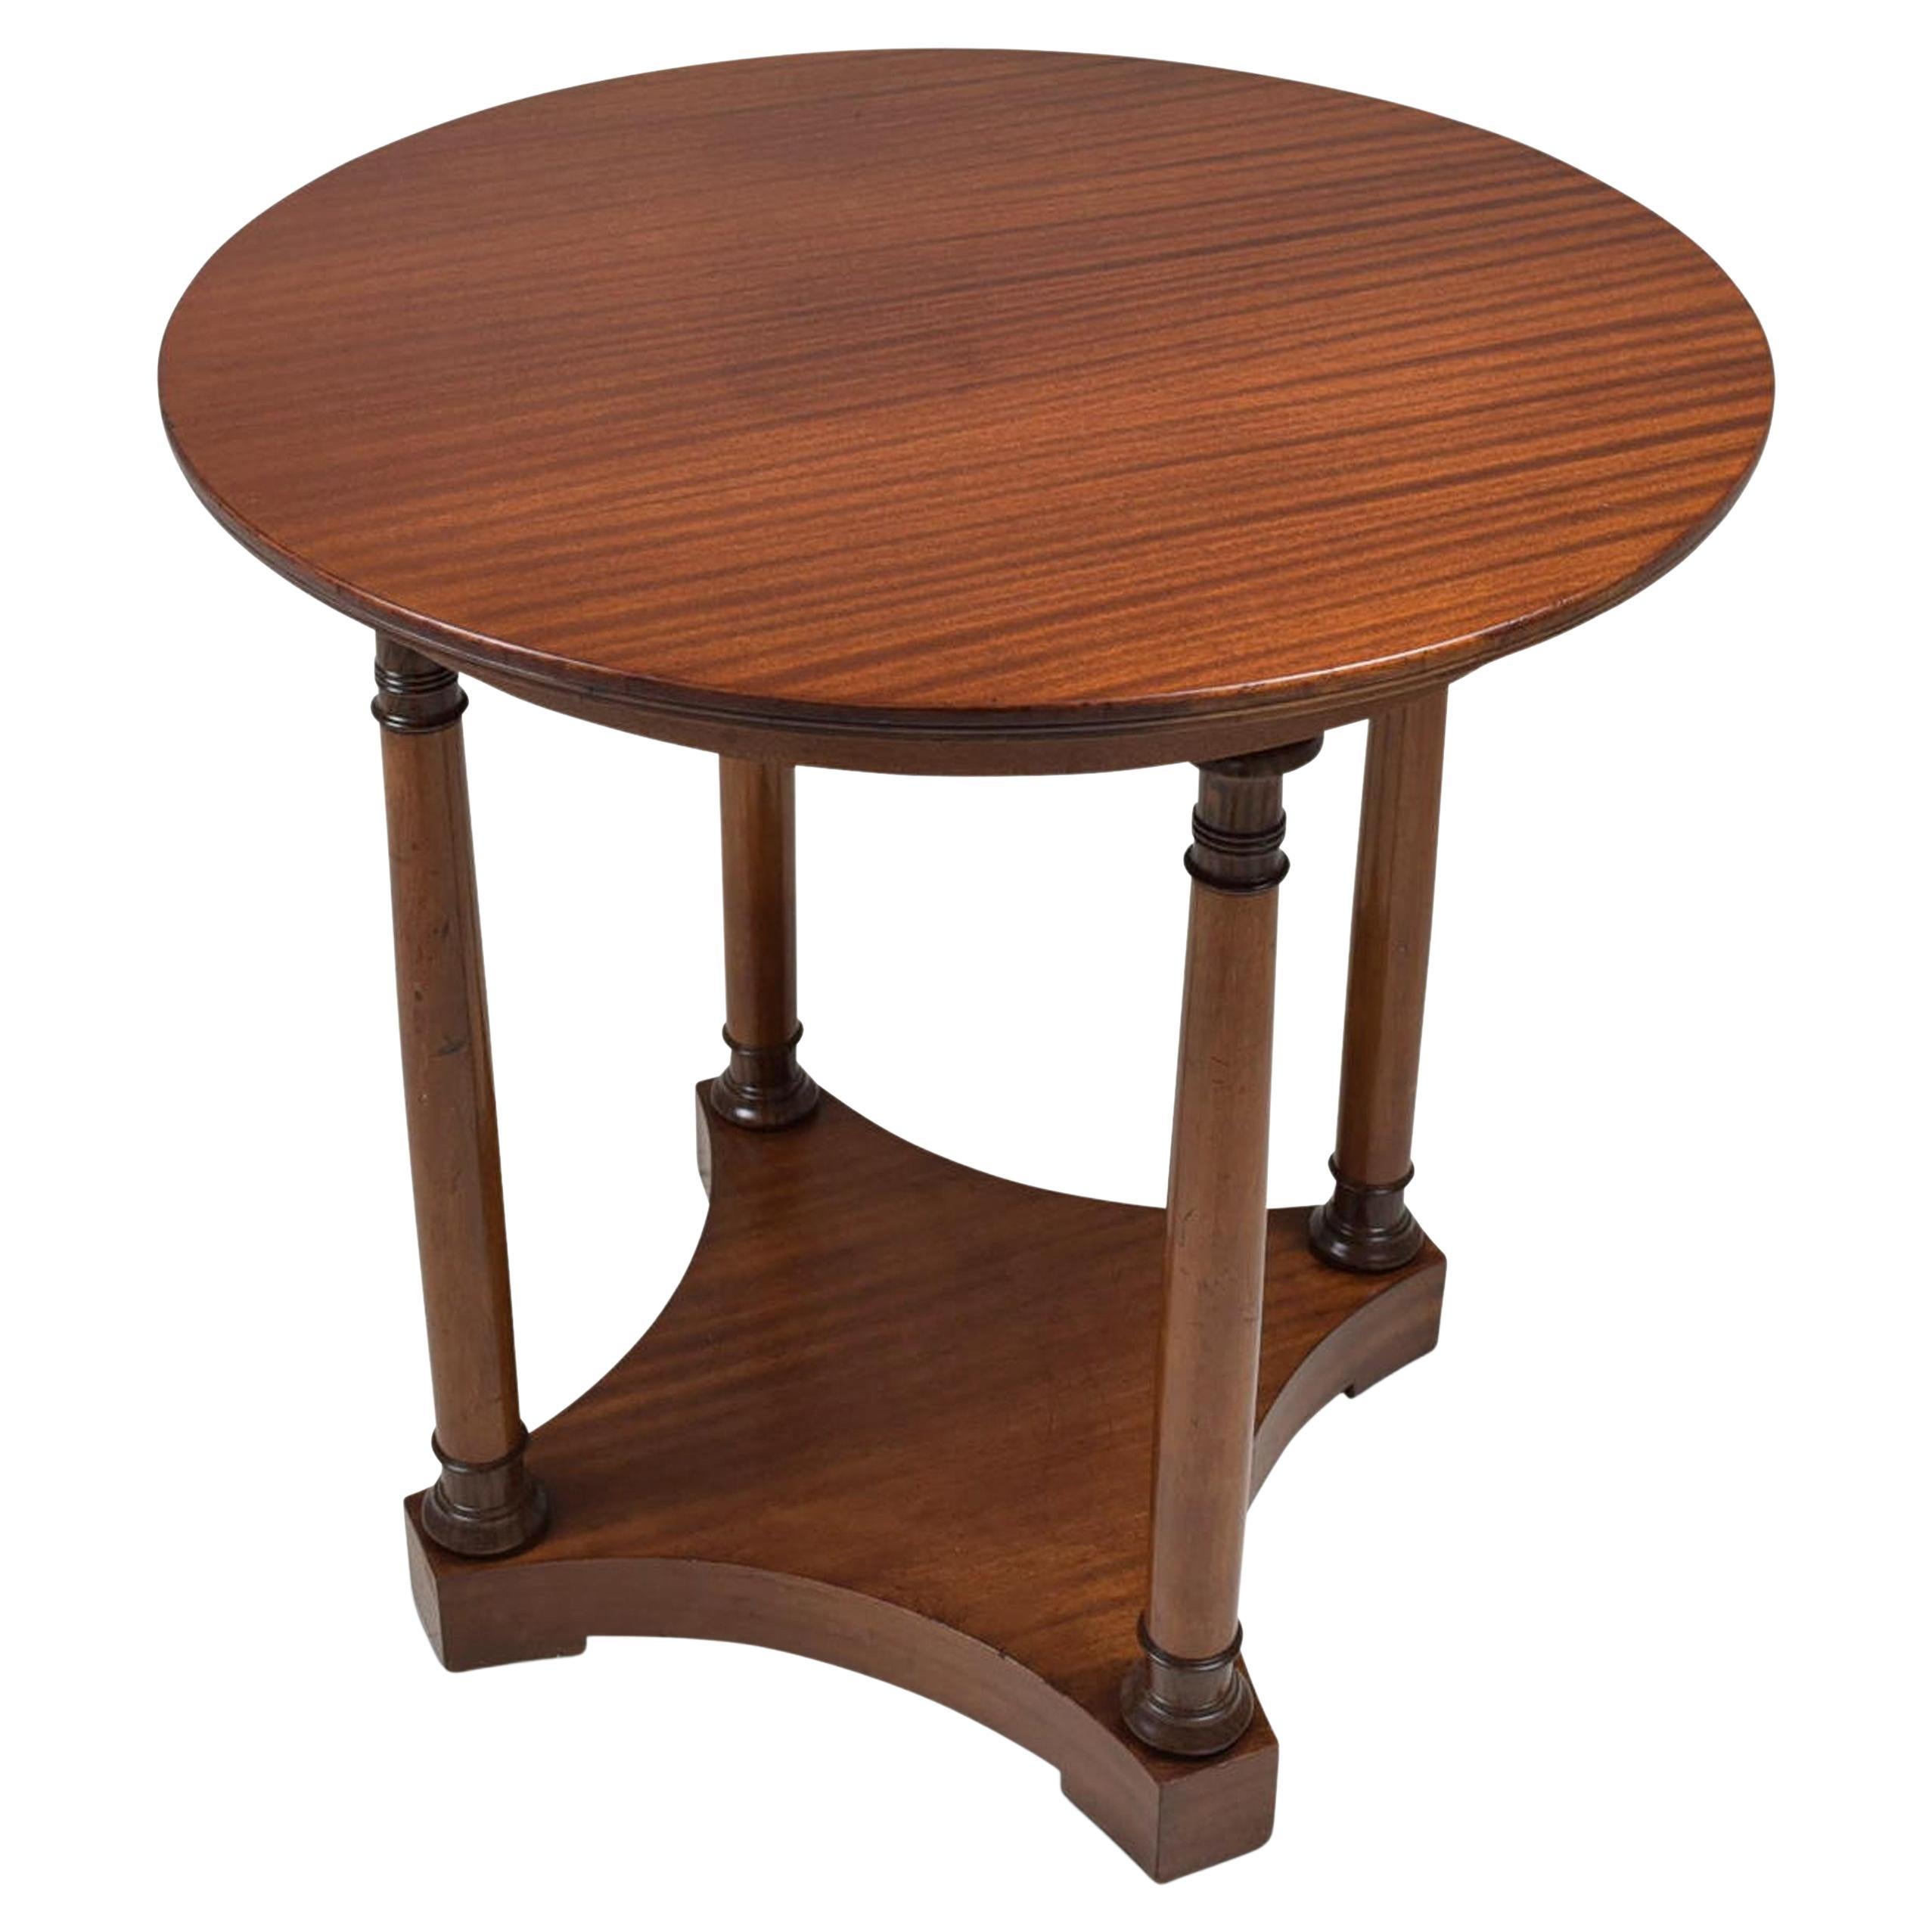 Art Deco Round Side Table / Coffee Table in Mahogany, circa 1925